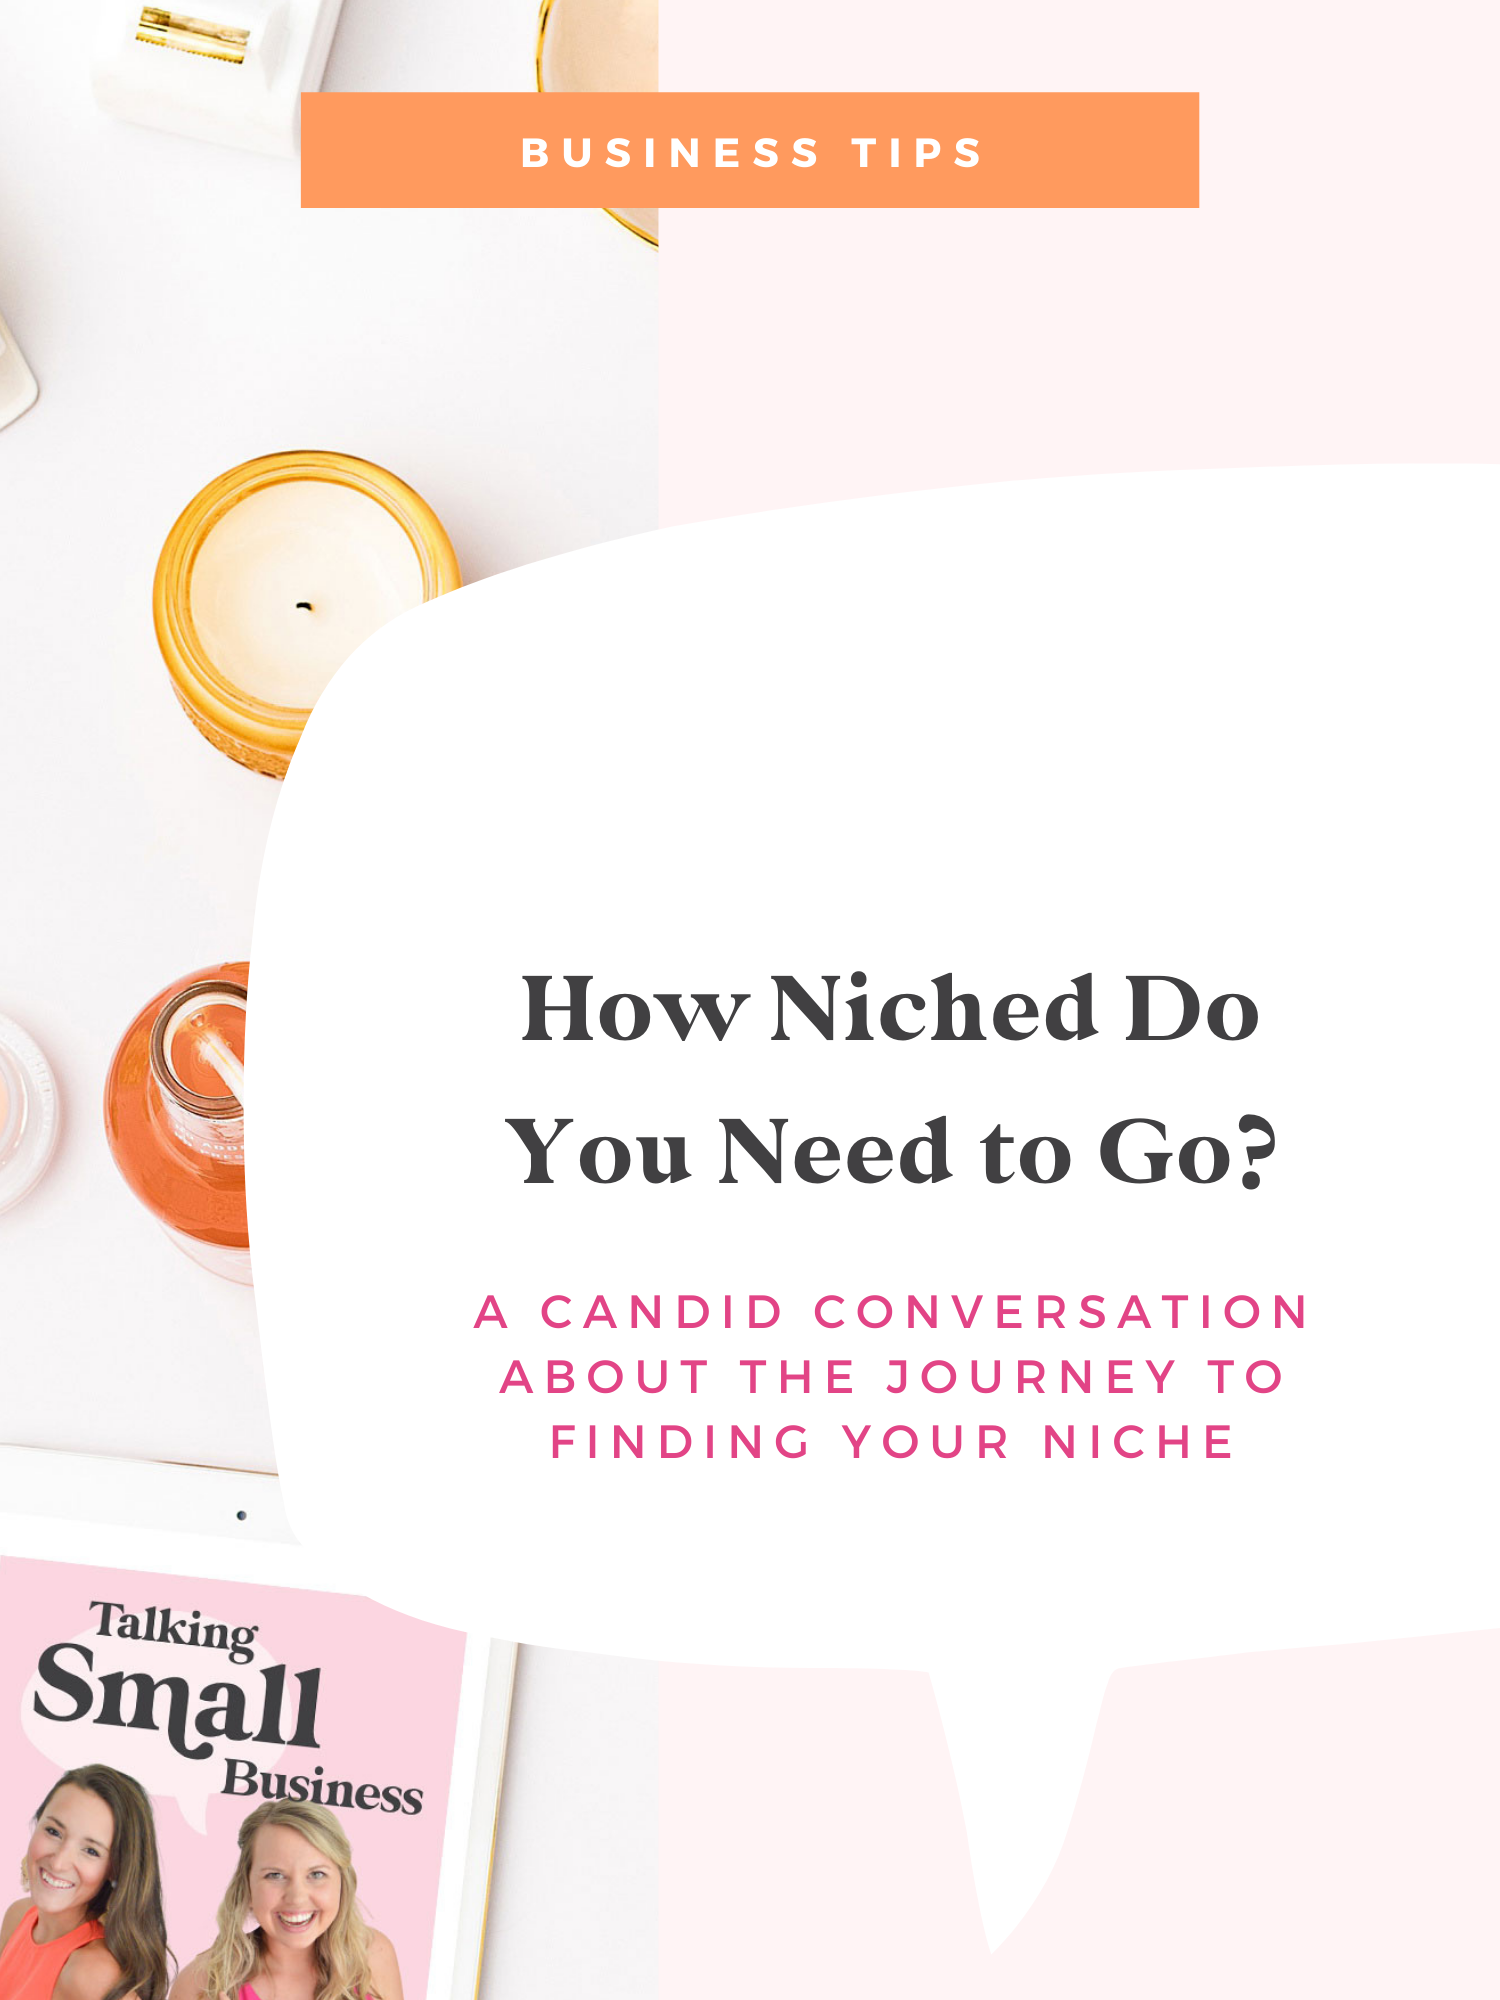 a candid conversation about finding your niche as a business owner